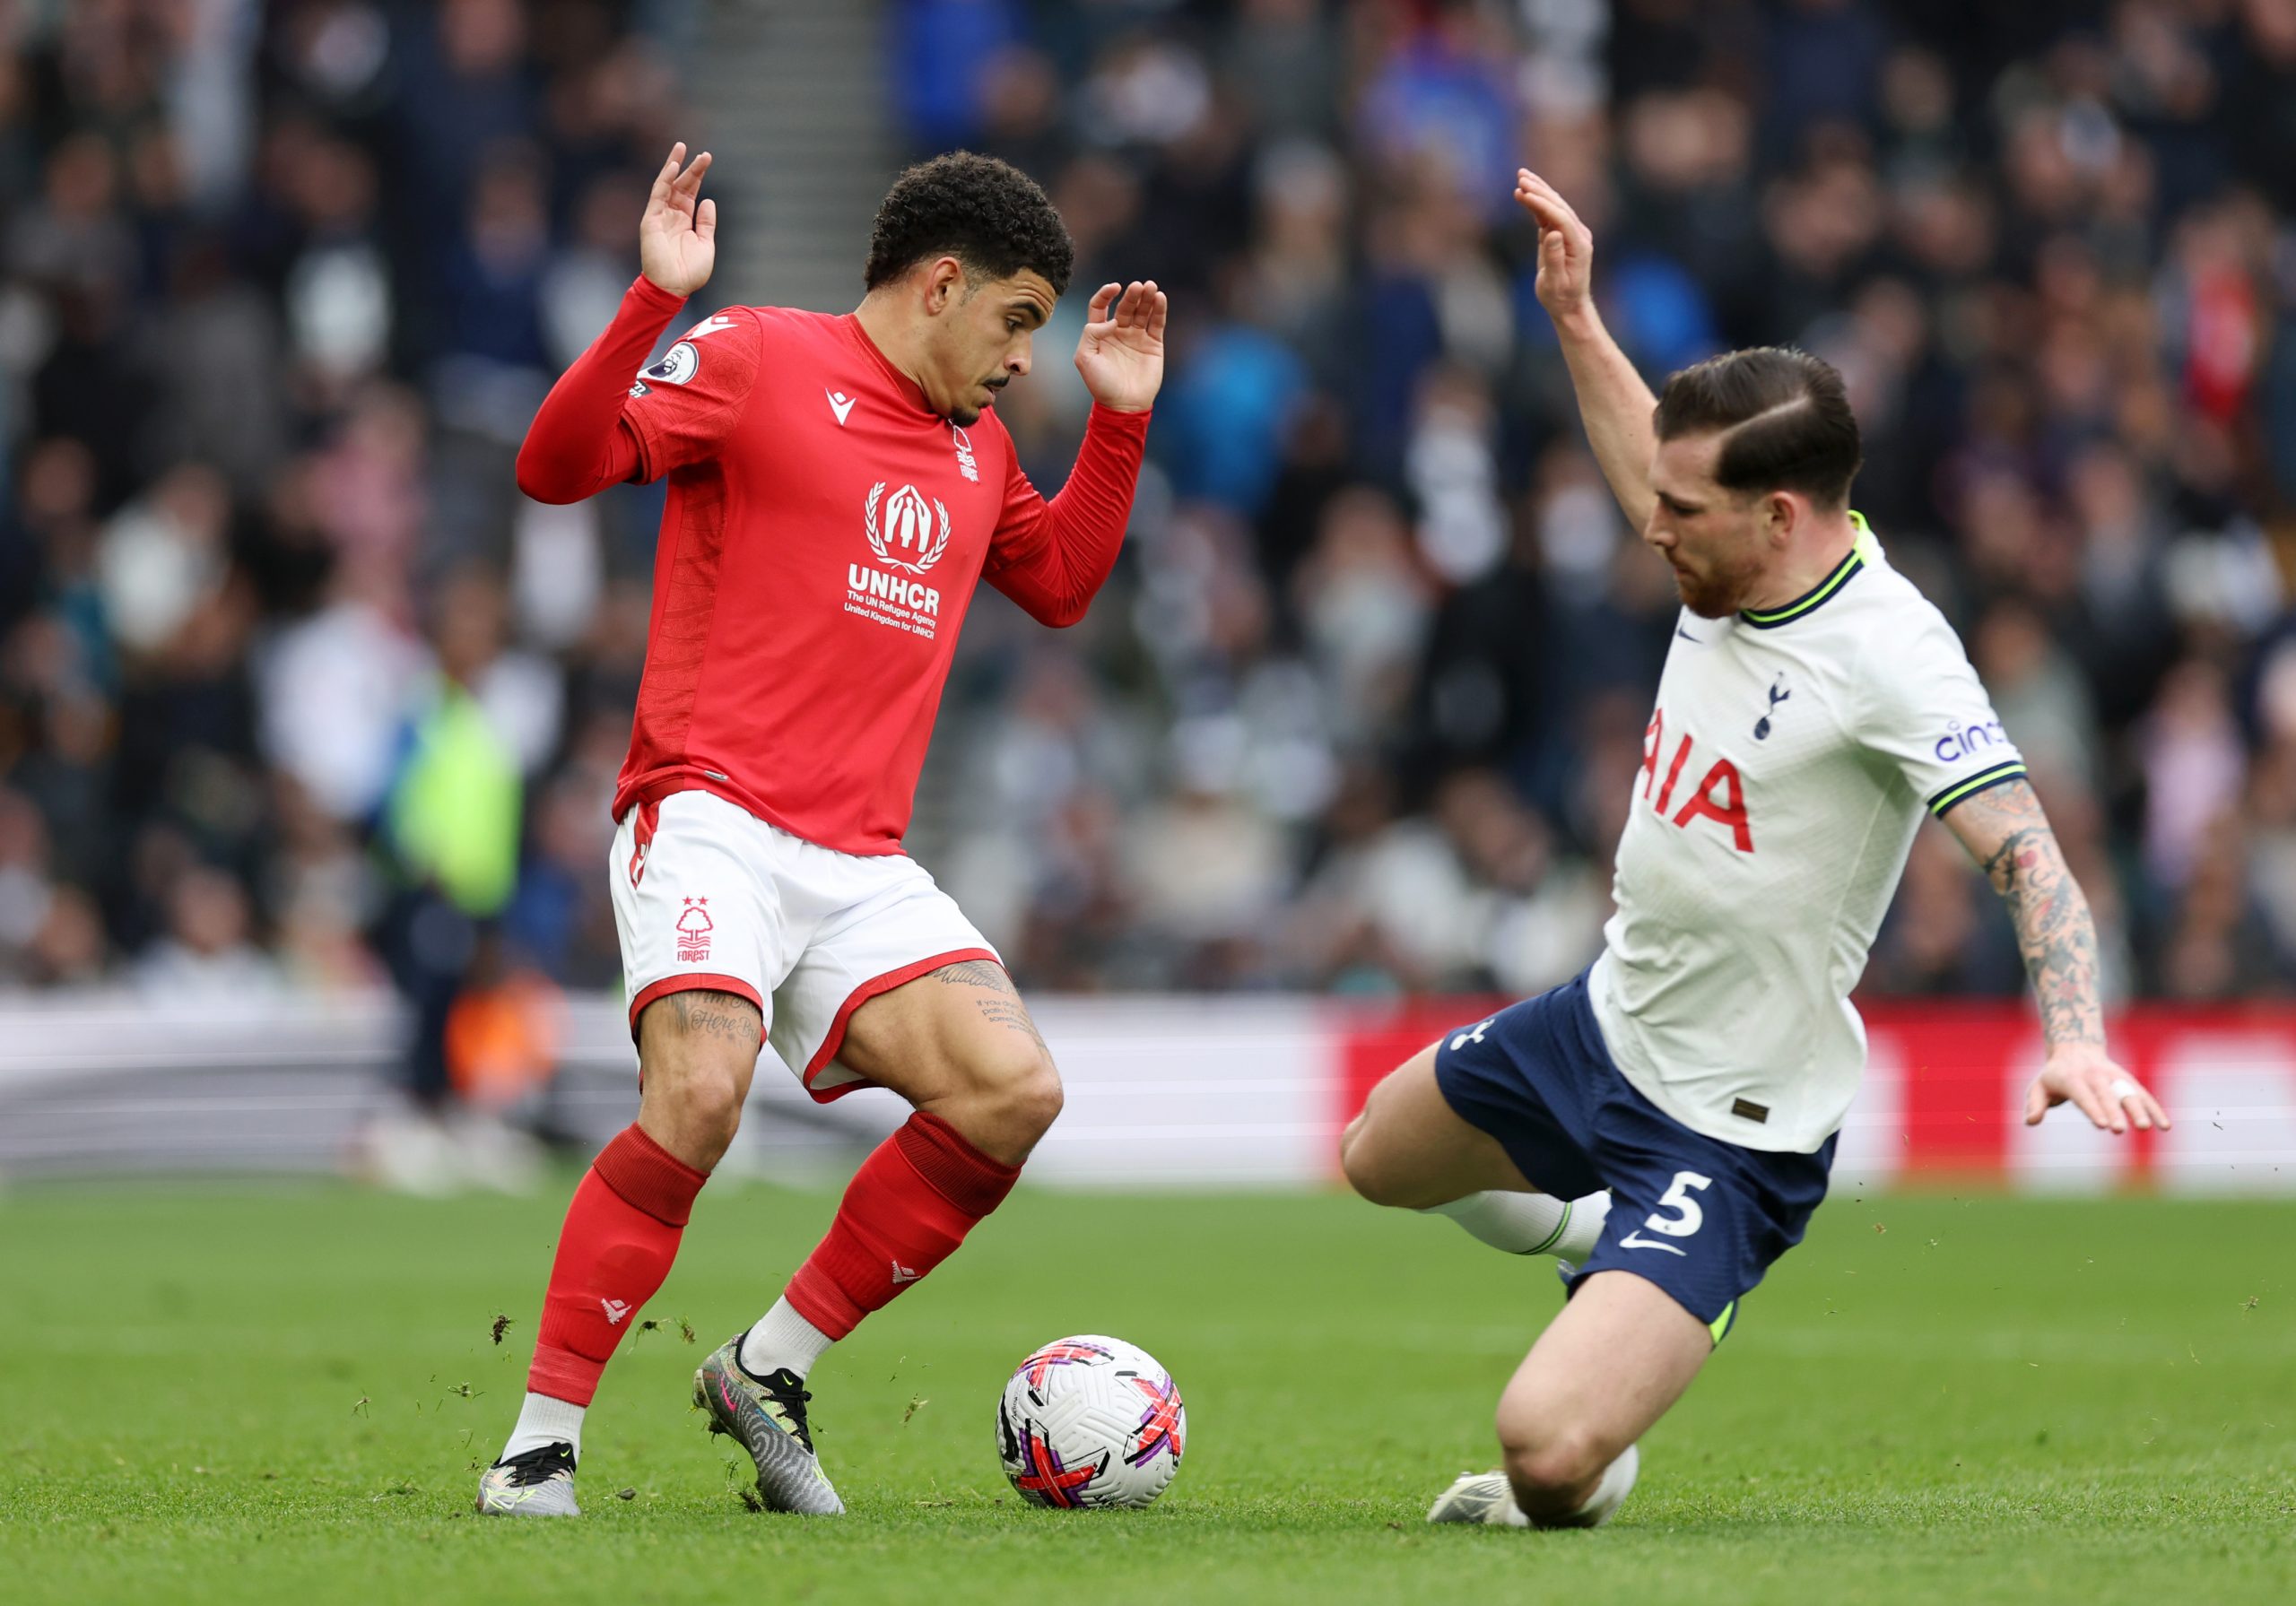 Morgan Gibbs-White of Nottingham Forest is challenged by Pierre-Emile Hojbjerg of Tottenham Hotspur.